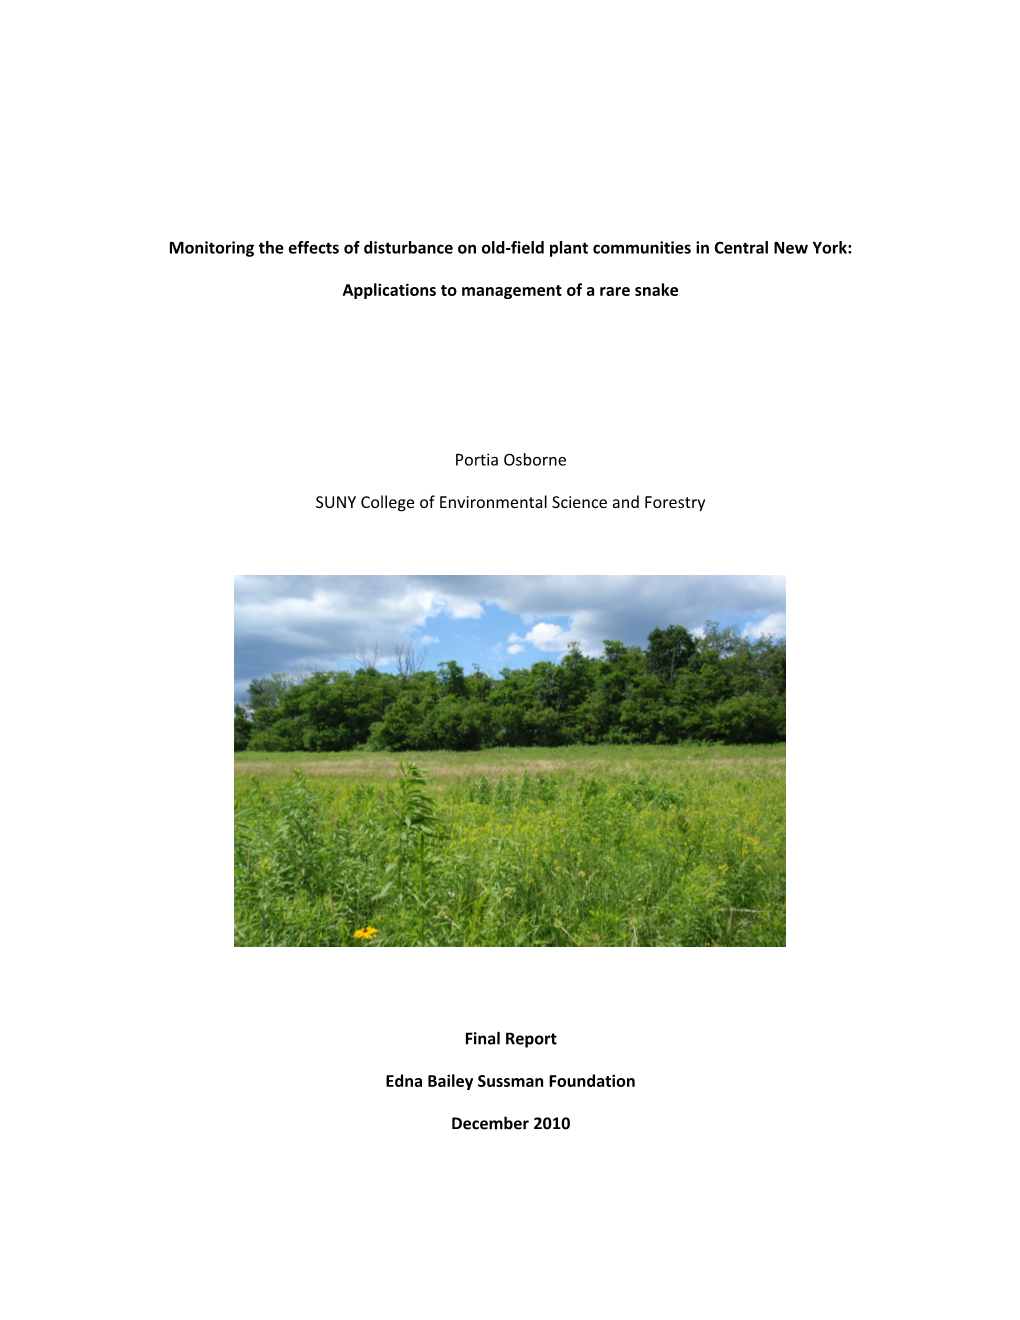 Monitoring the Effects of Disturbance on Old-Field Plant Communities in Central New York